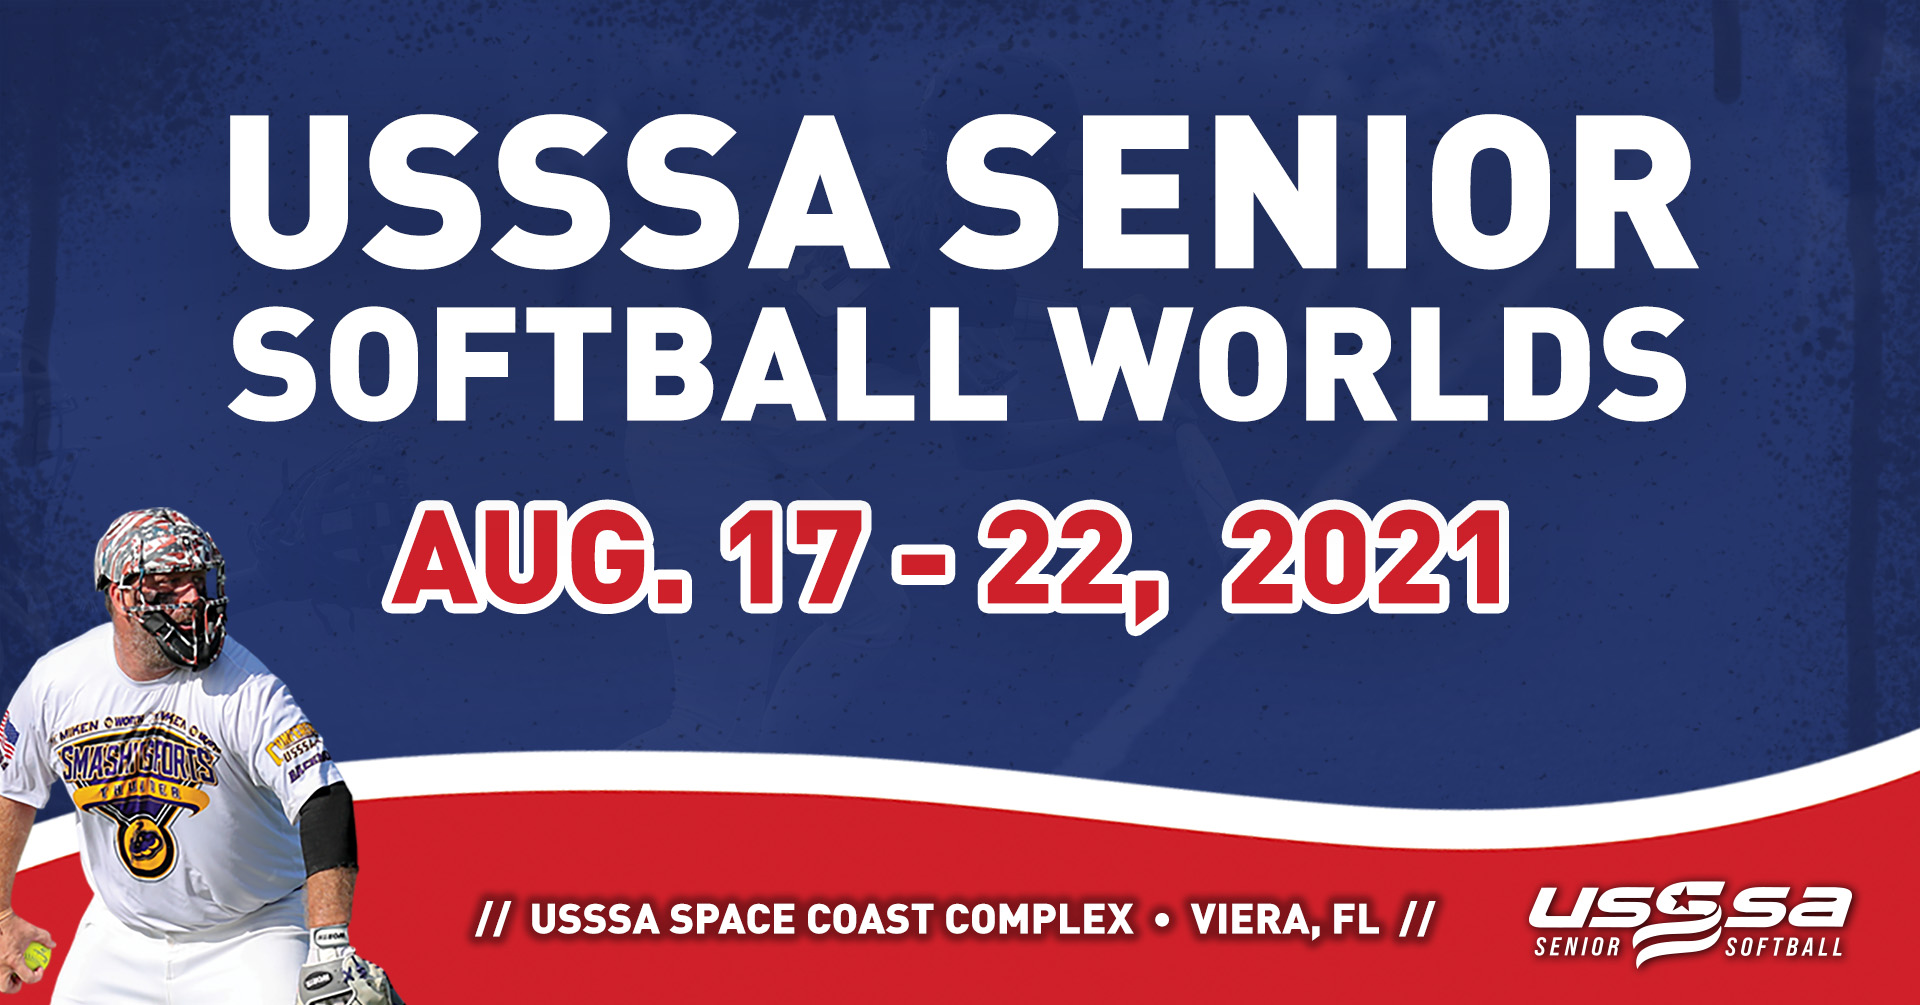 USSSA - United States Specialty Sports Association